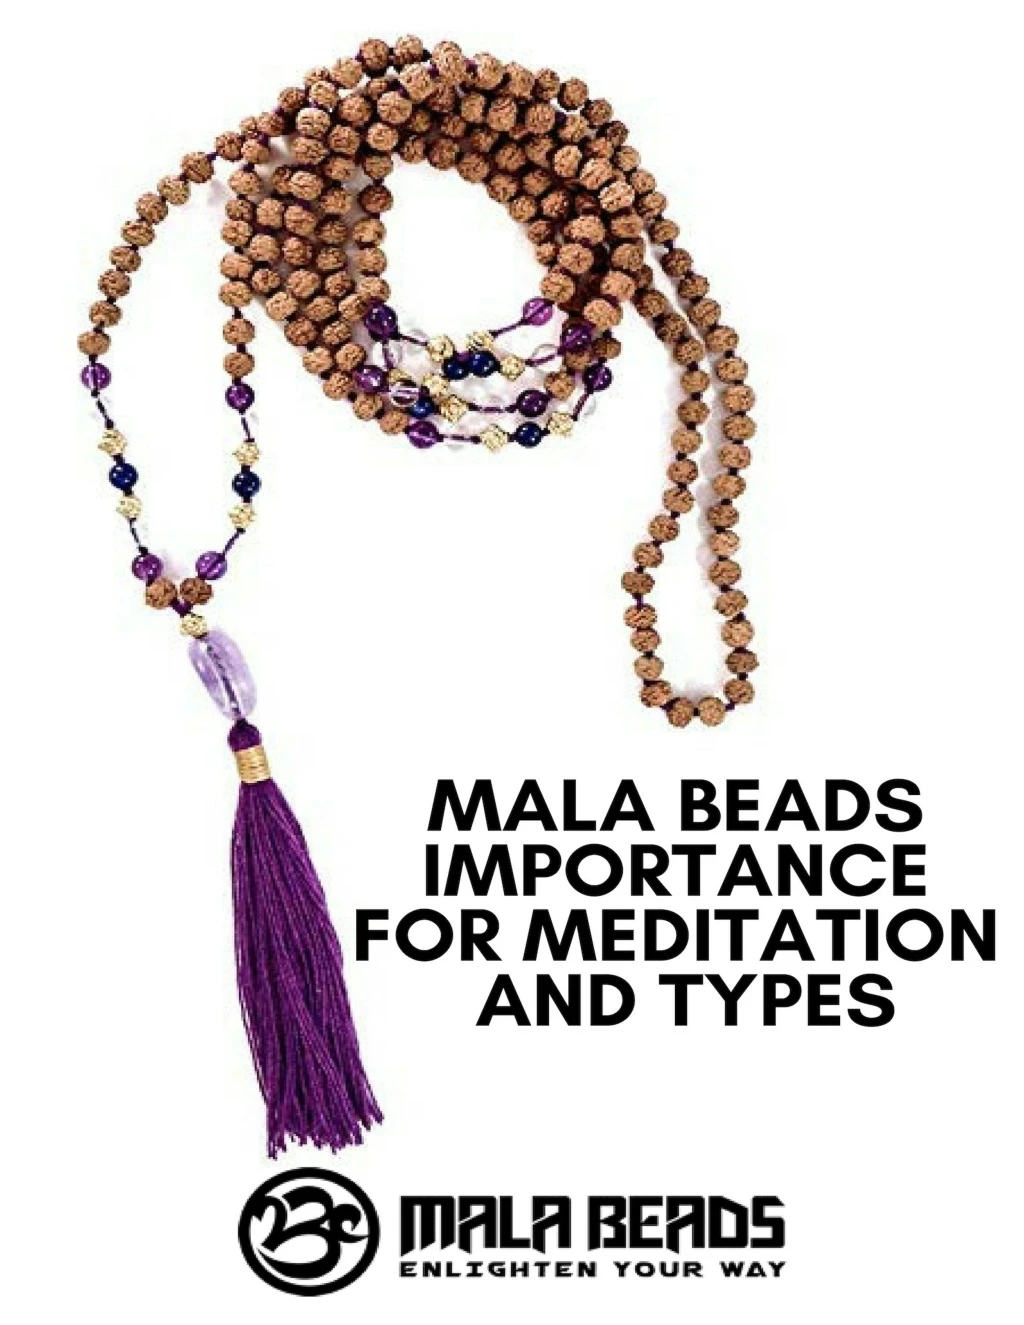 mala beads importance for meditation and types